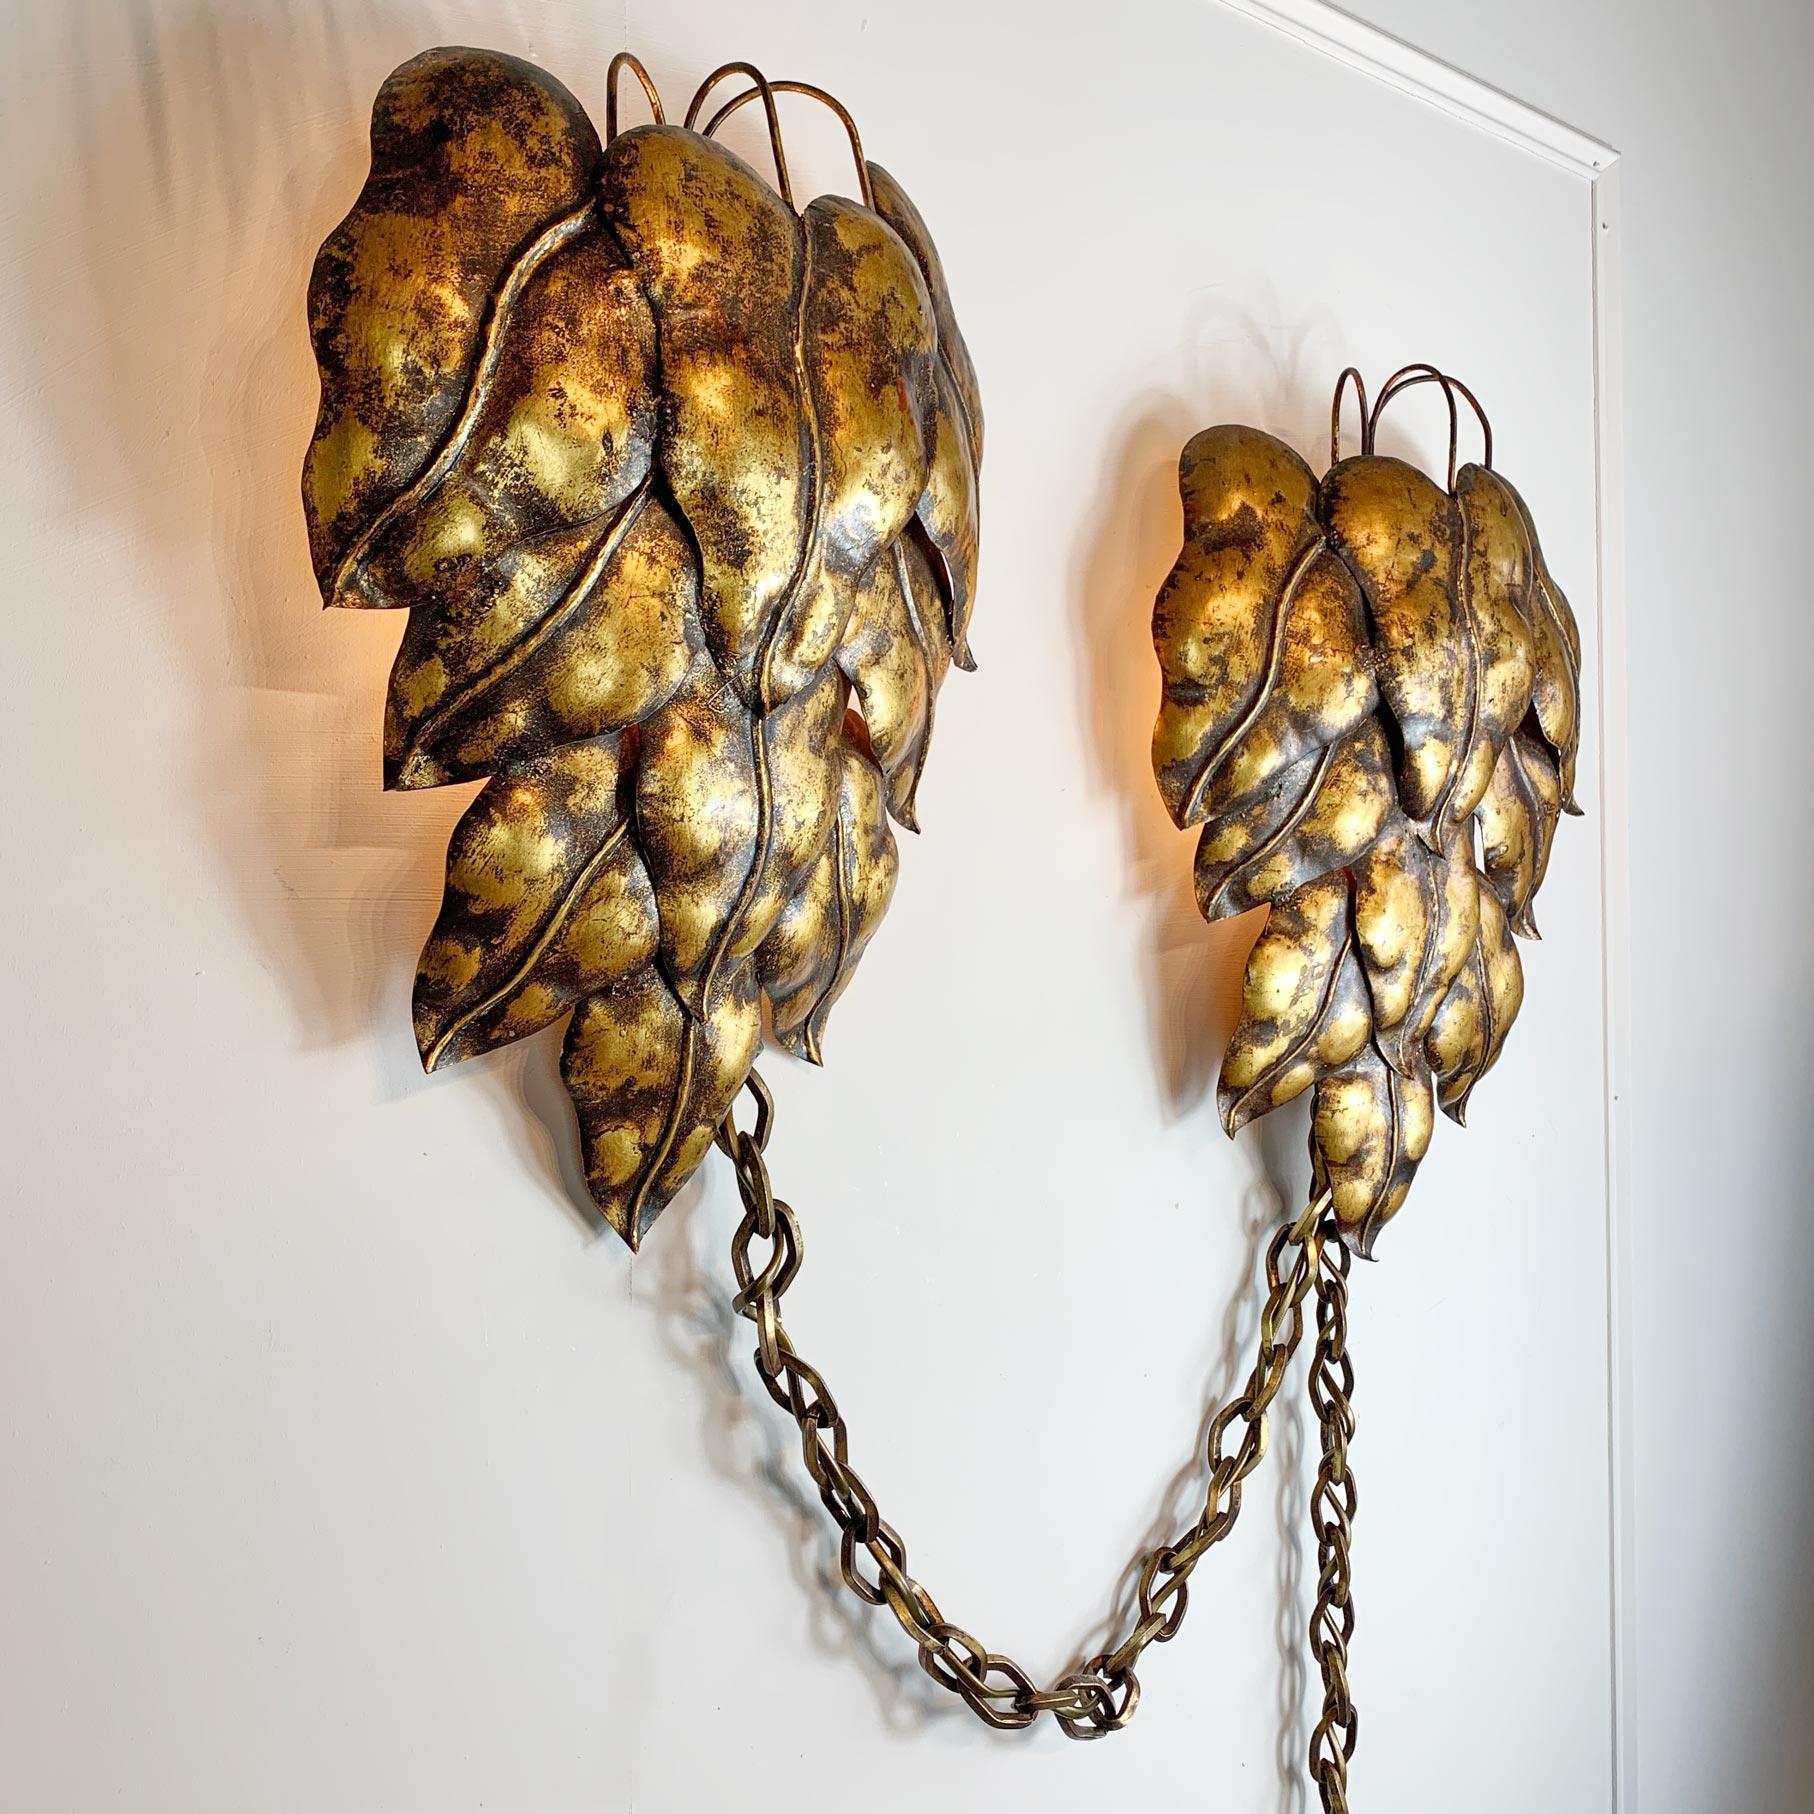 Pair of Gold Italian Leaf and Chain Swag Wall Lights, 1950's For Sale 1